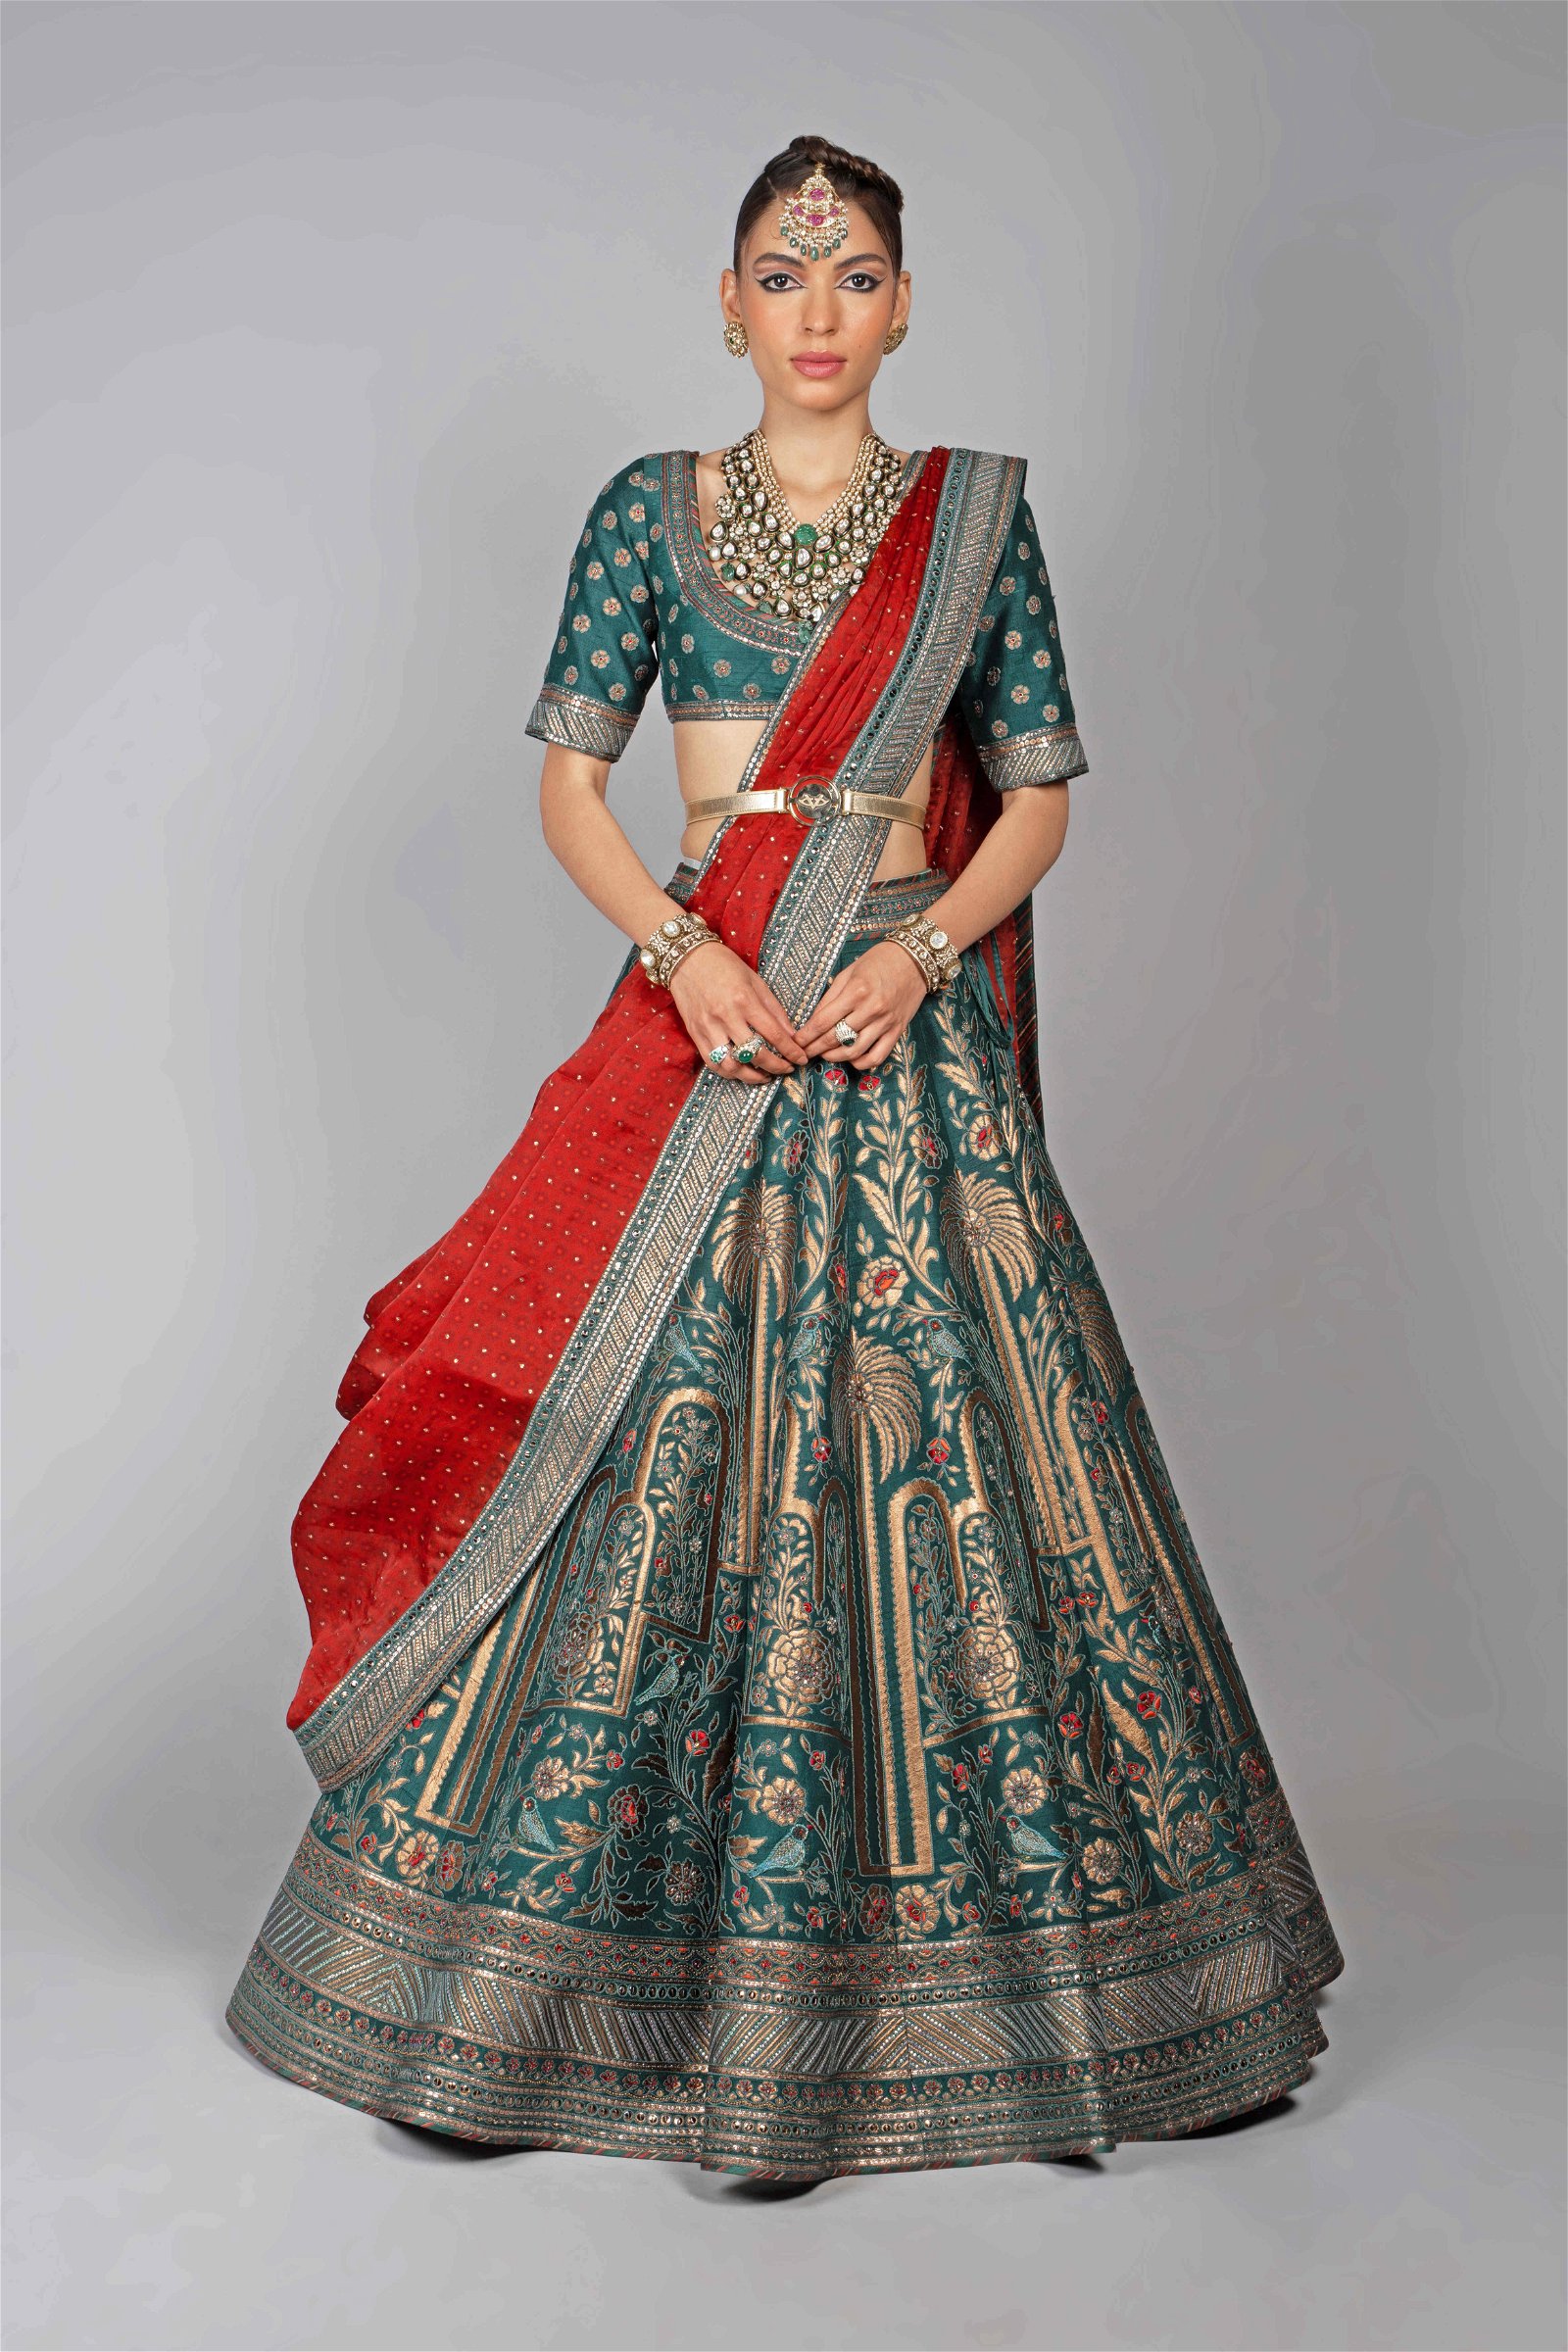 Buy Green and red Lehenga semi stitched(Faux Georgette Dress Material) With  Dupatta at Amazon.in